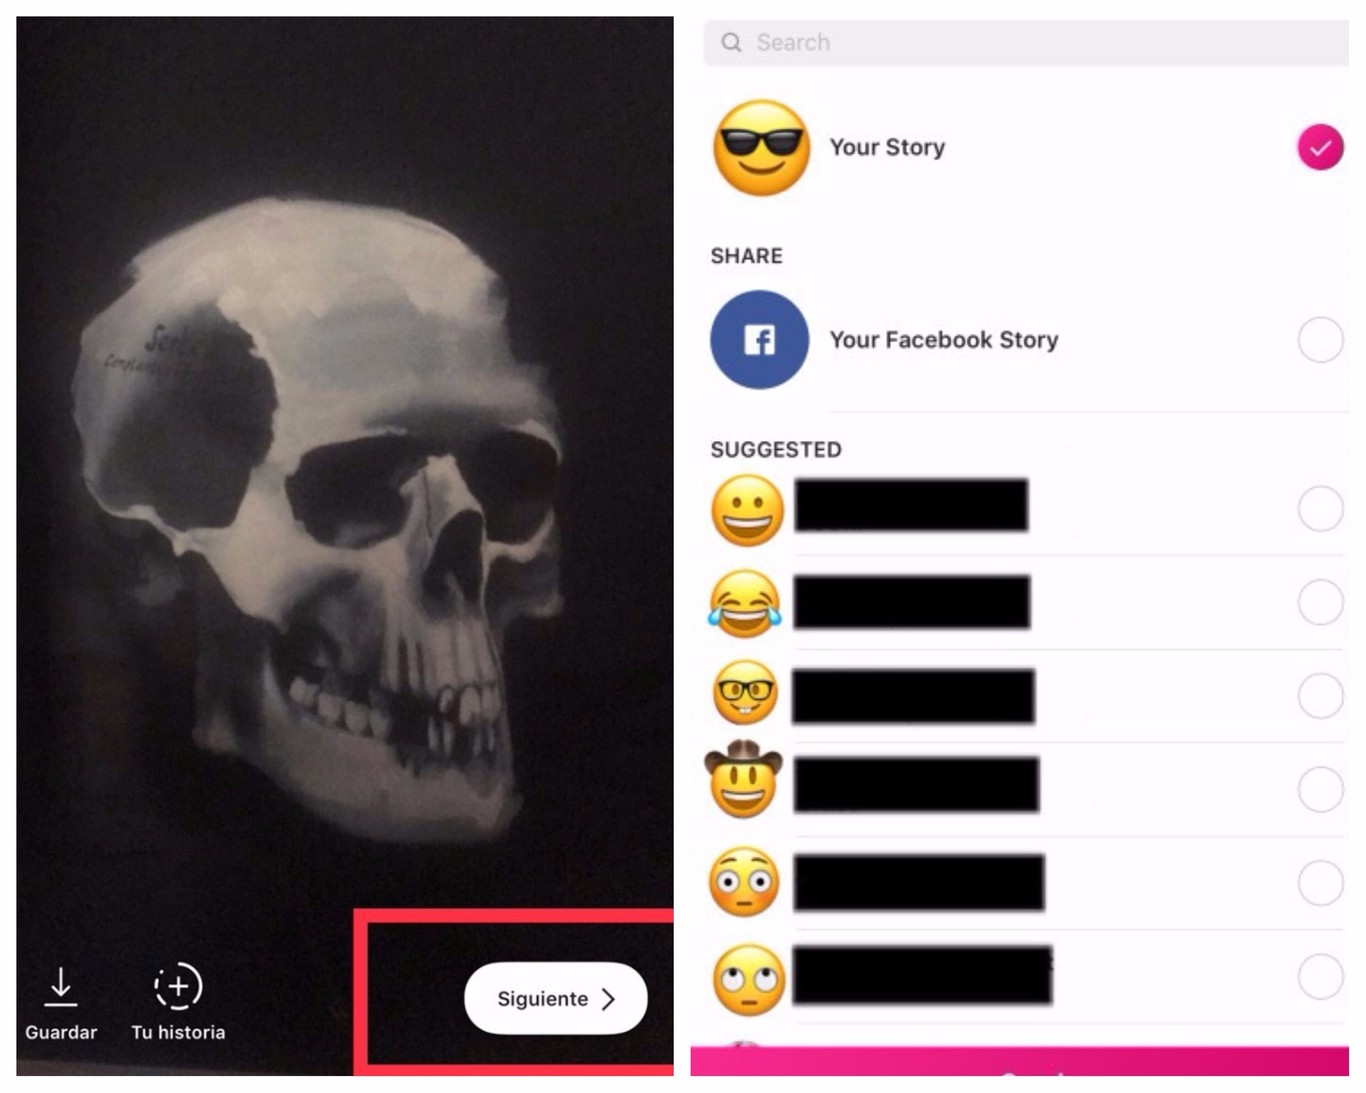 How to share Instagram Stories on Facebook